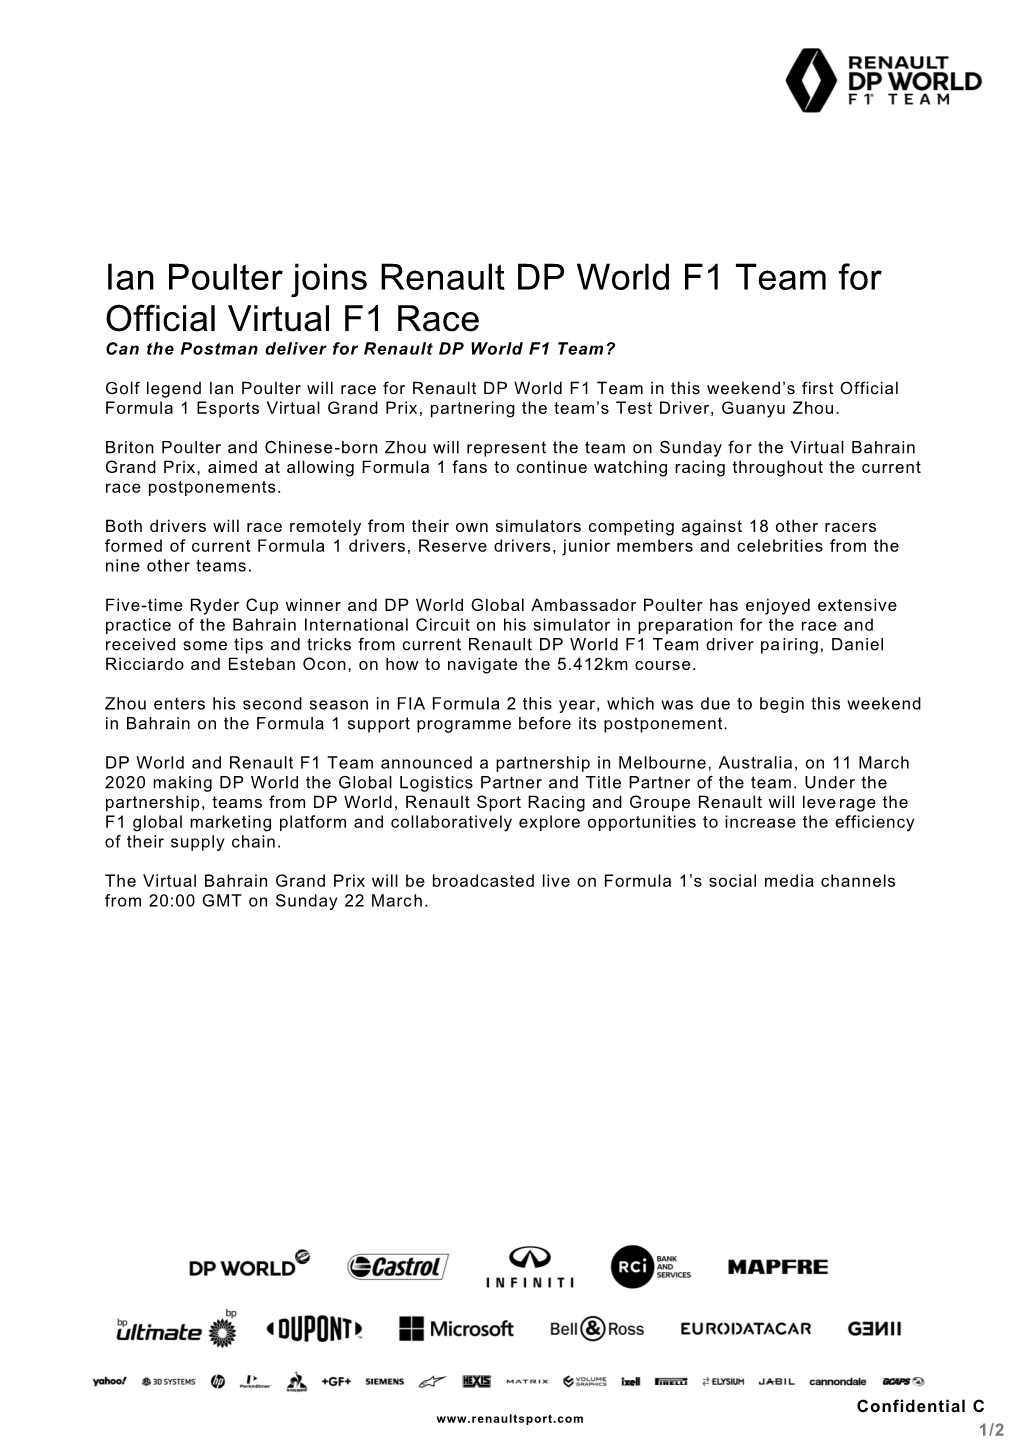 Ian Poulter Joins Renault DP World F1 Team for Official Virtual F1 Race Can the Postman Deliver for Renault DP World F1 Team?